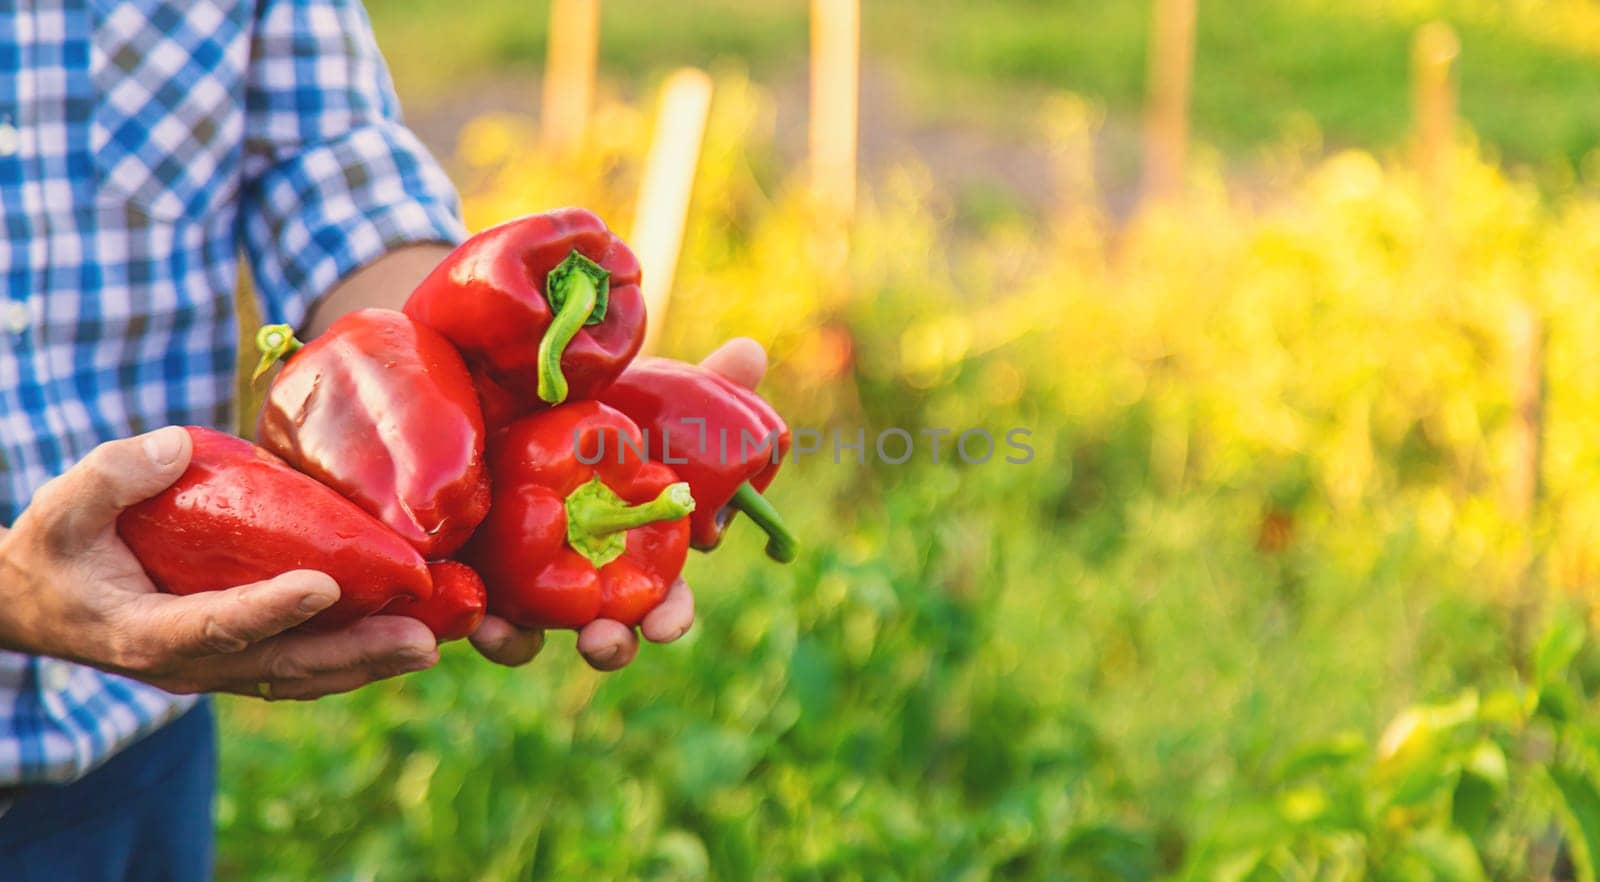 Sweet pepper harvest in the garden in the hands of a farmer. Selective focus. by yanadjana